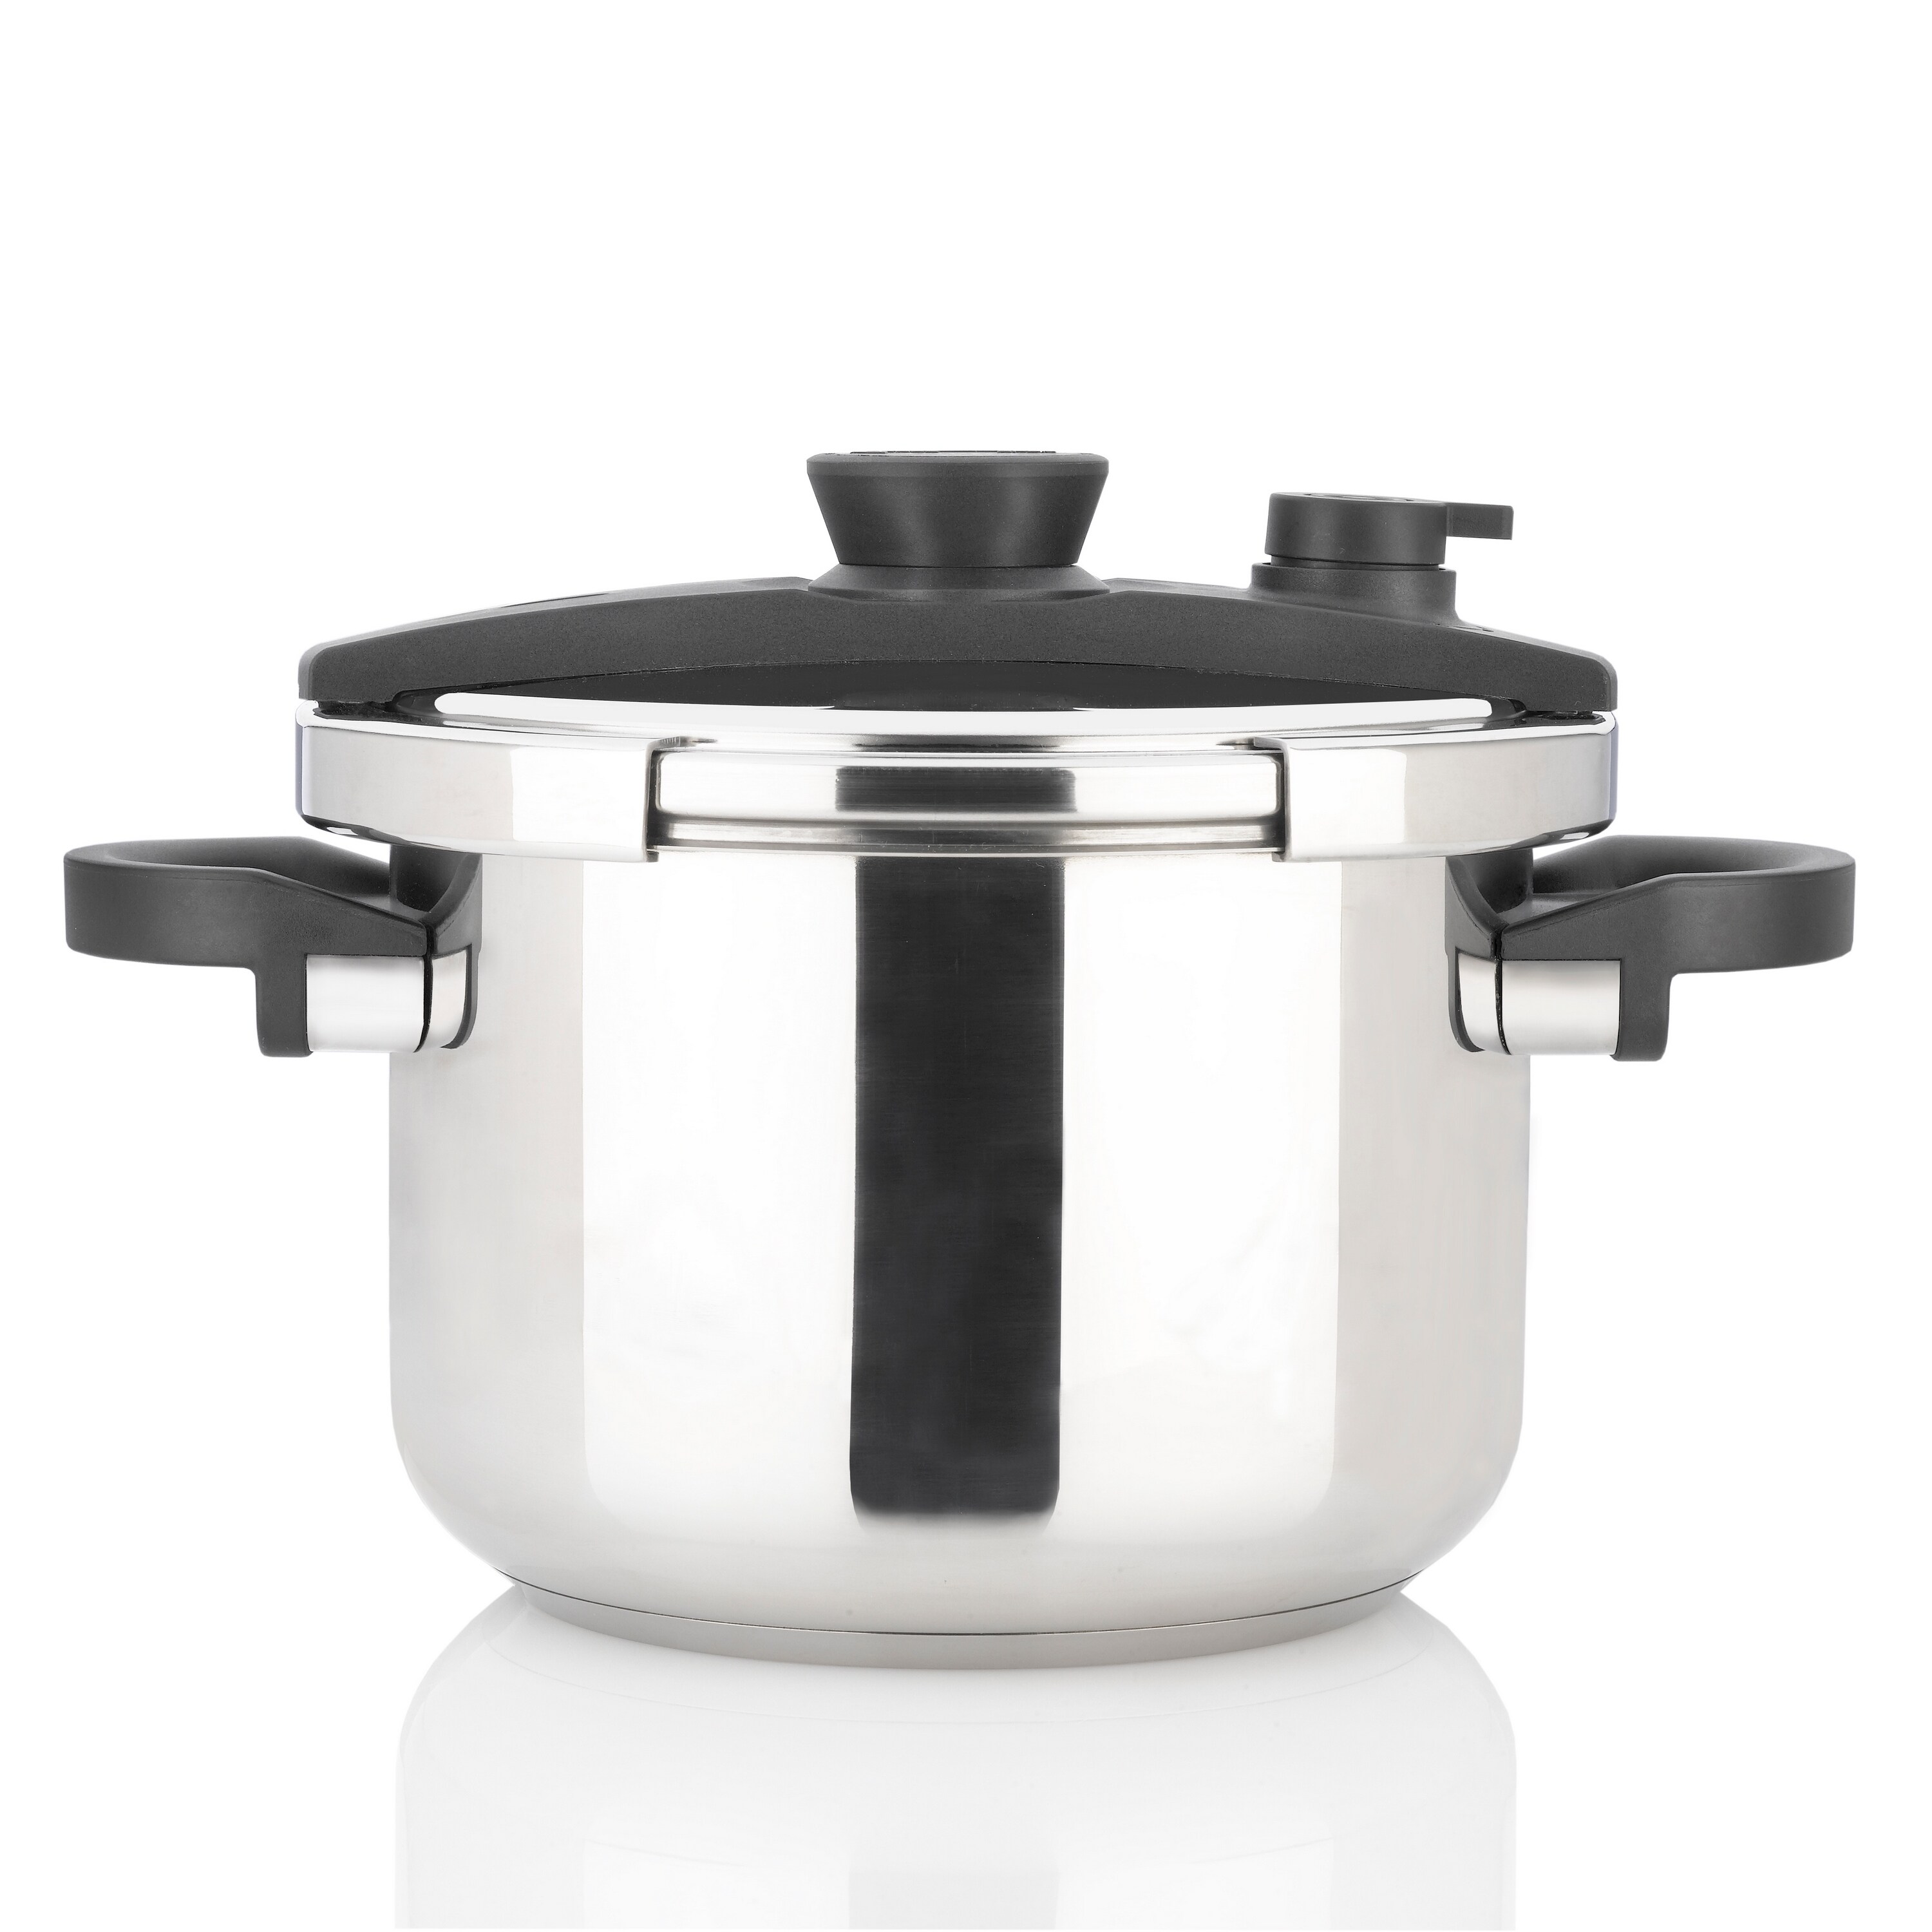 WMF Plus 6 1/2 Quart Pressure Cooker Stainless Steel for sale online